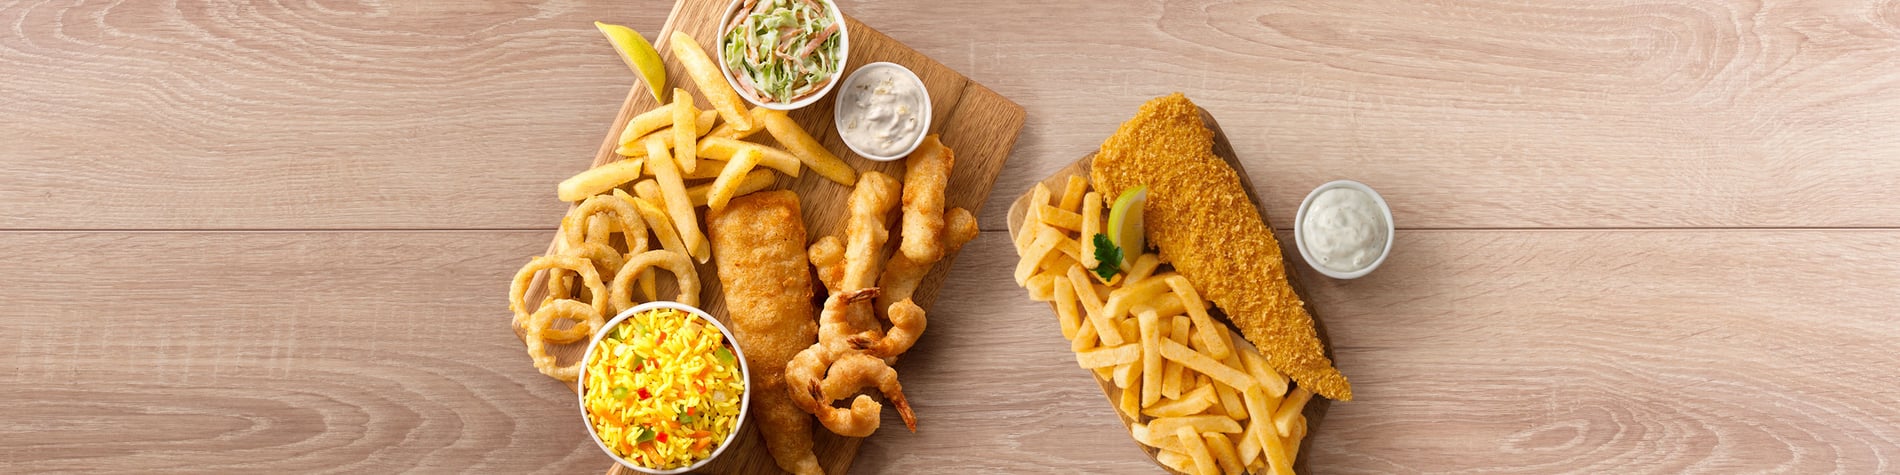 Seafood meals from Fishaways Kenilworth Centre including a Crunchy Fish and Chips meal and a seafood Platter for One with hake, calamari, prawns, chips, onion rings, and coleslaw.